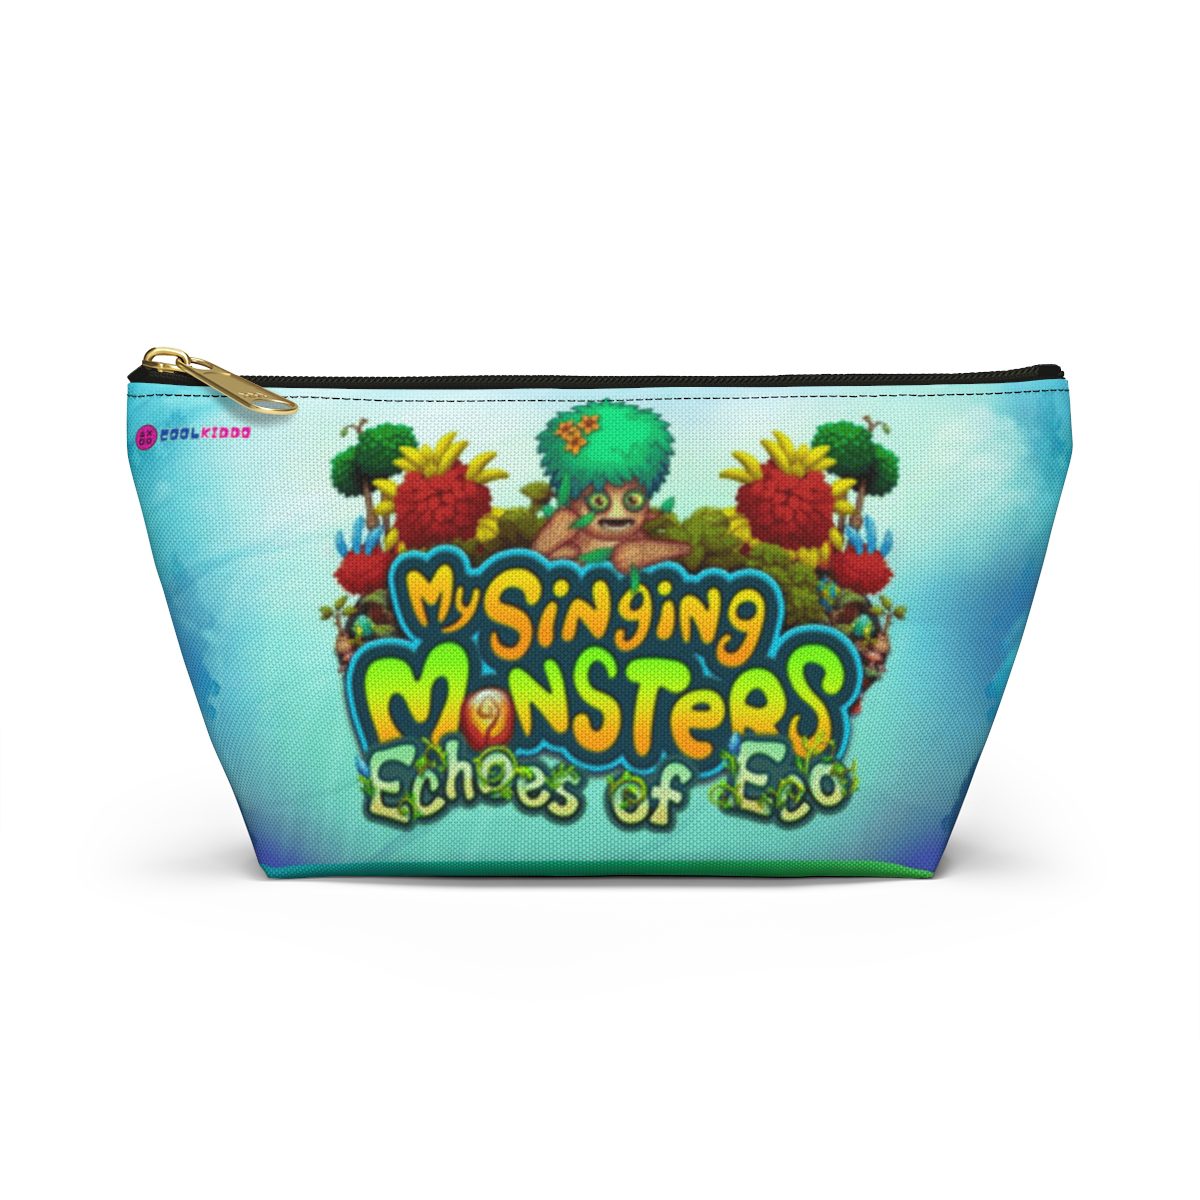 My Singing Monsters Echoes of Eco Pencil Pouch Cool Kiddo 22